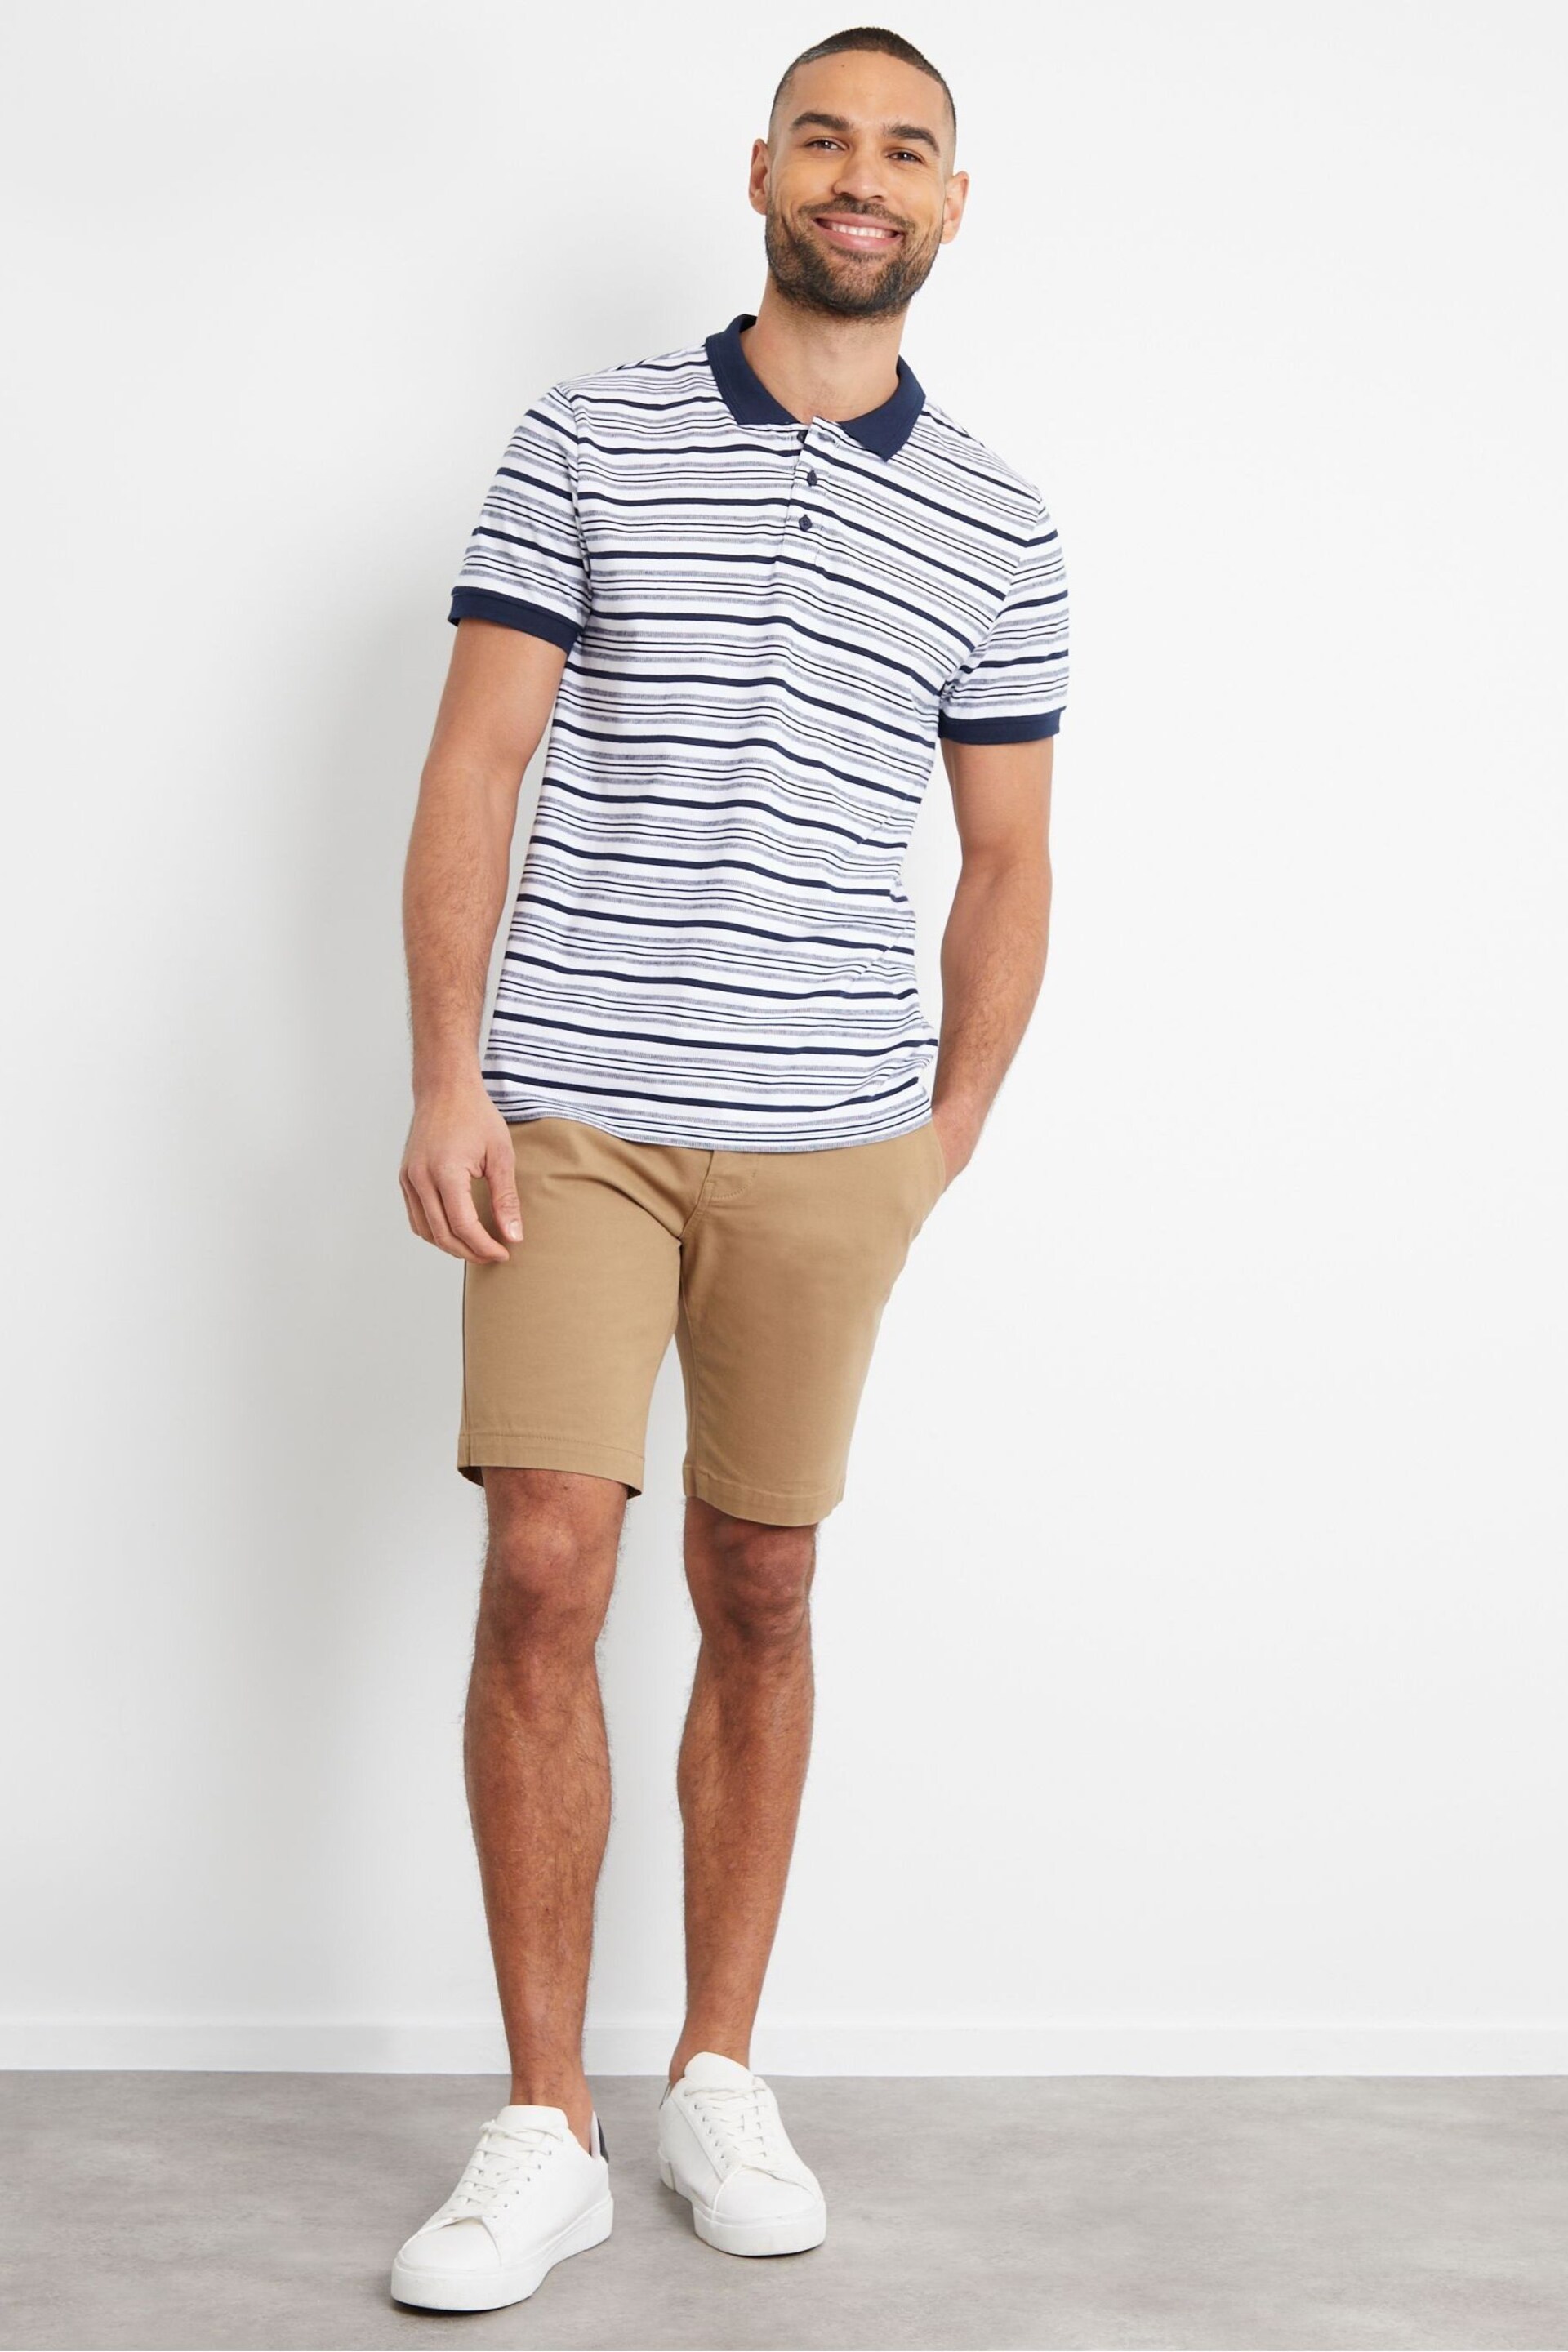 Threadbare Stone Slim Fit Cotton Chino Shorts With Stretch - Image 3 of 4